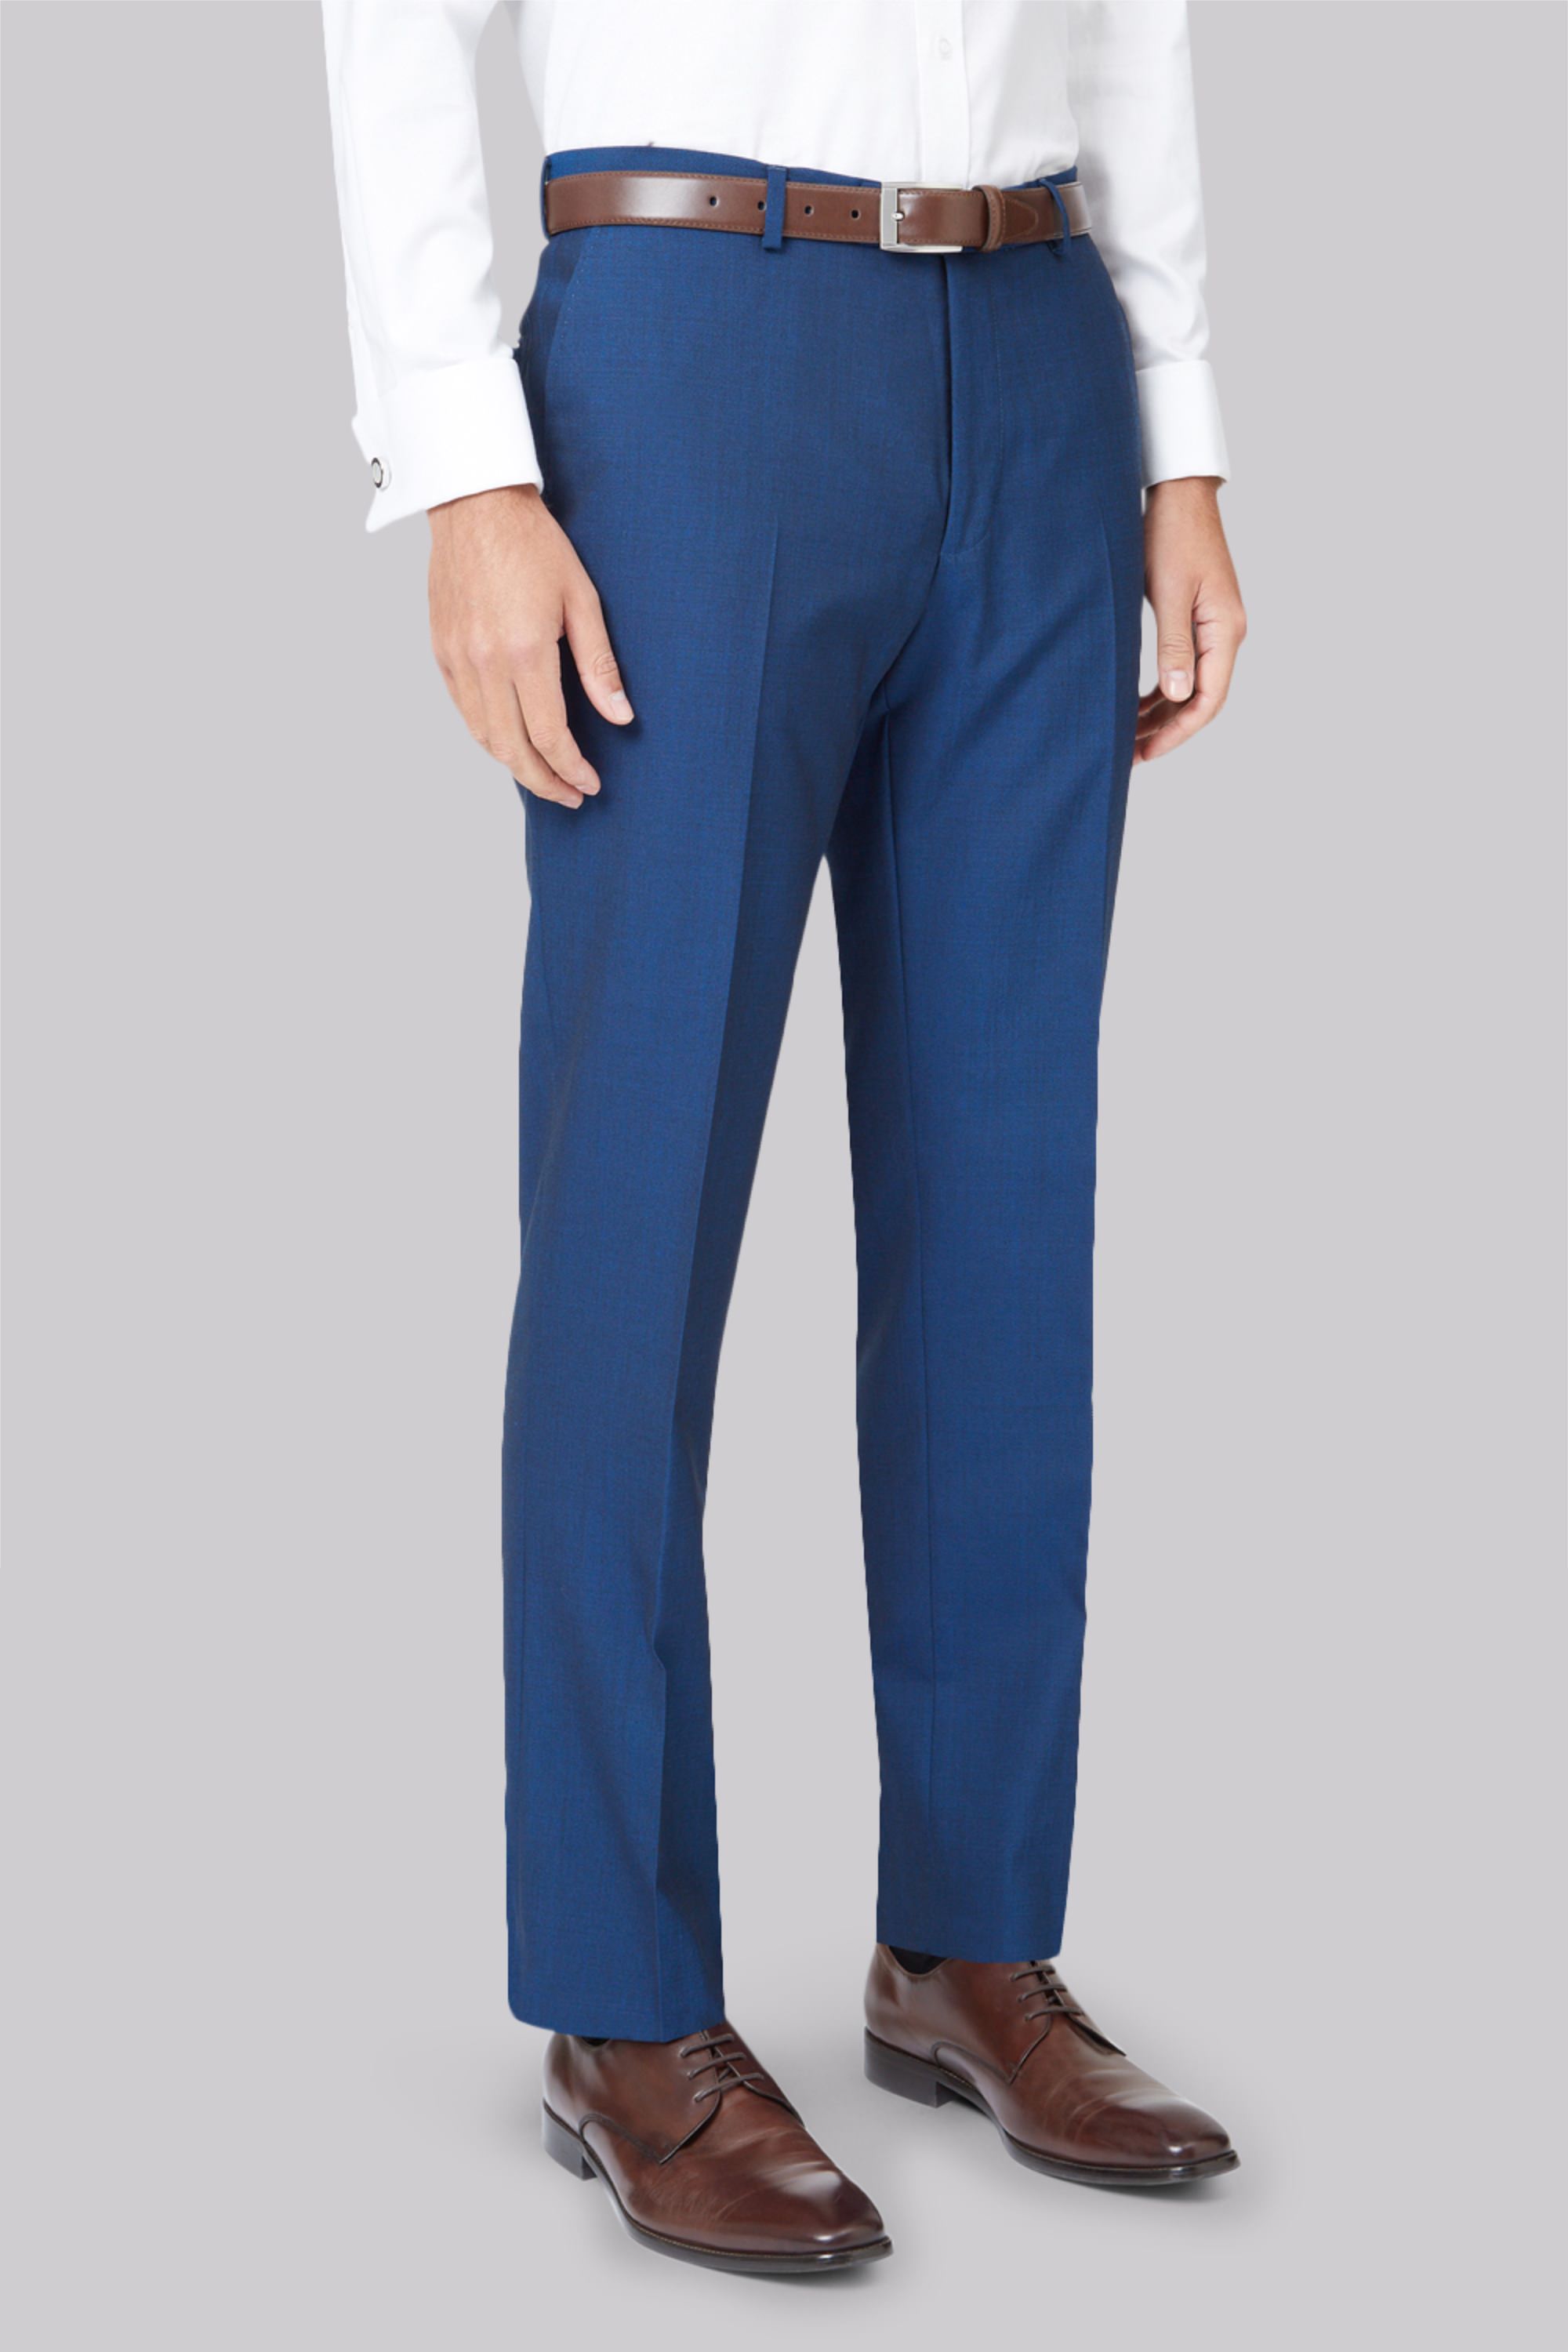 Ted Baker Tailored Fit Teal Mohair Look Trousers